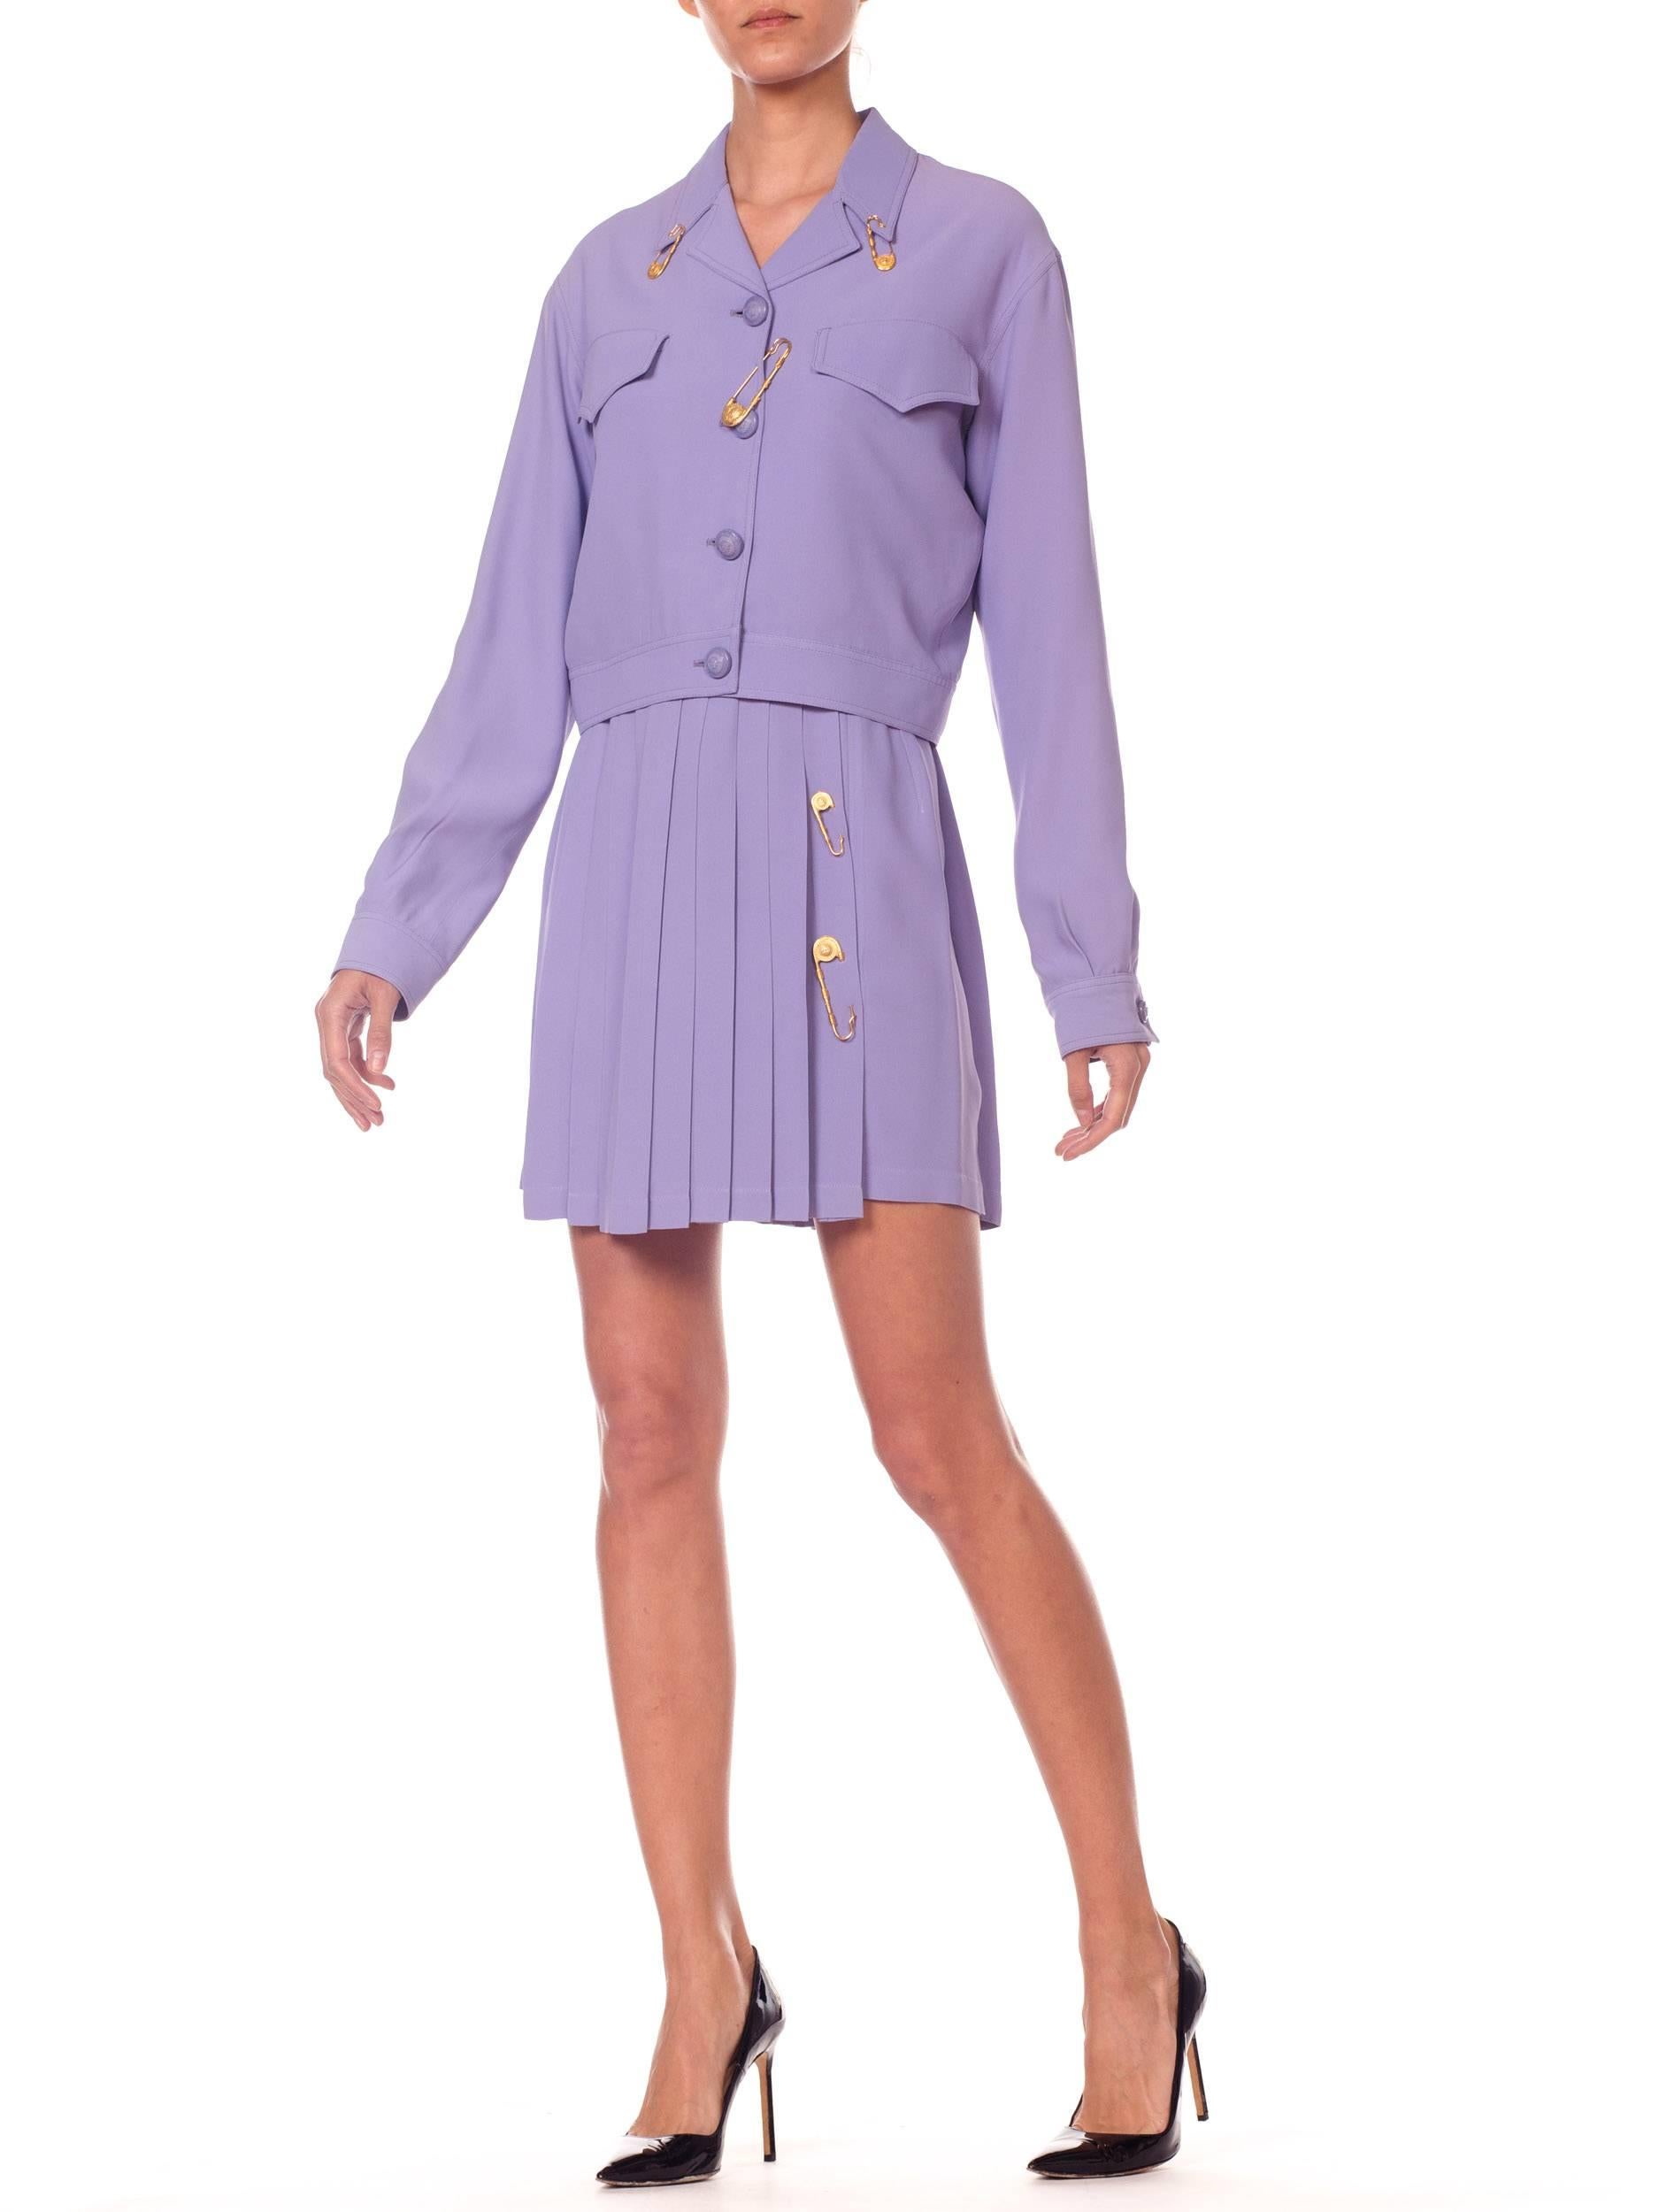 1990S GIANNI VERSACE Lilac Rayon Blend Crepe Safety Pin Suit Skirt 1